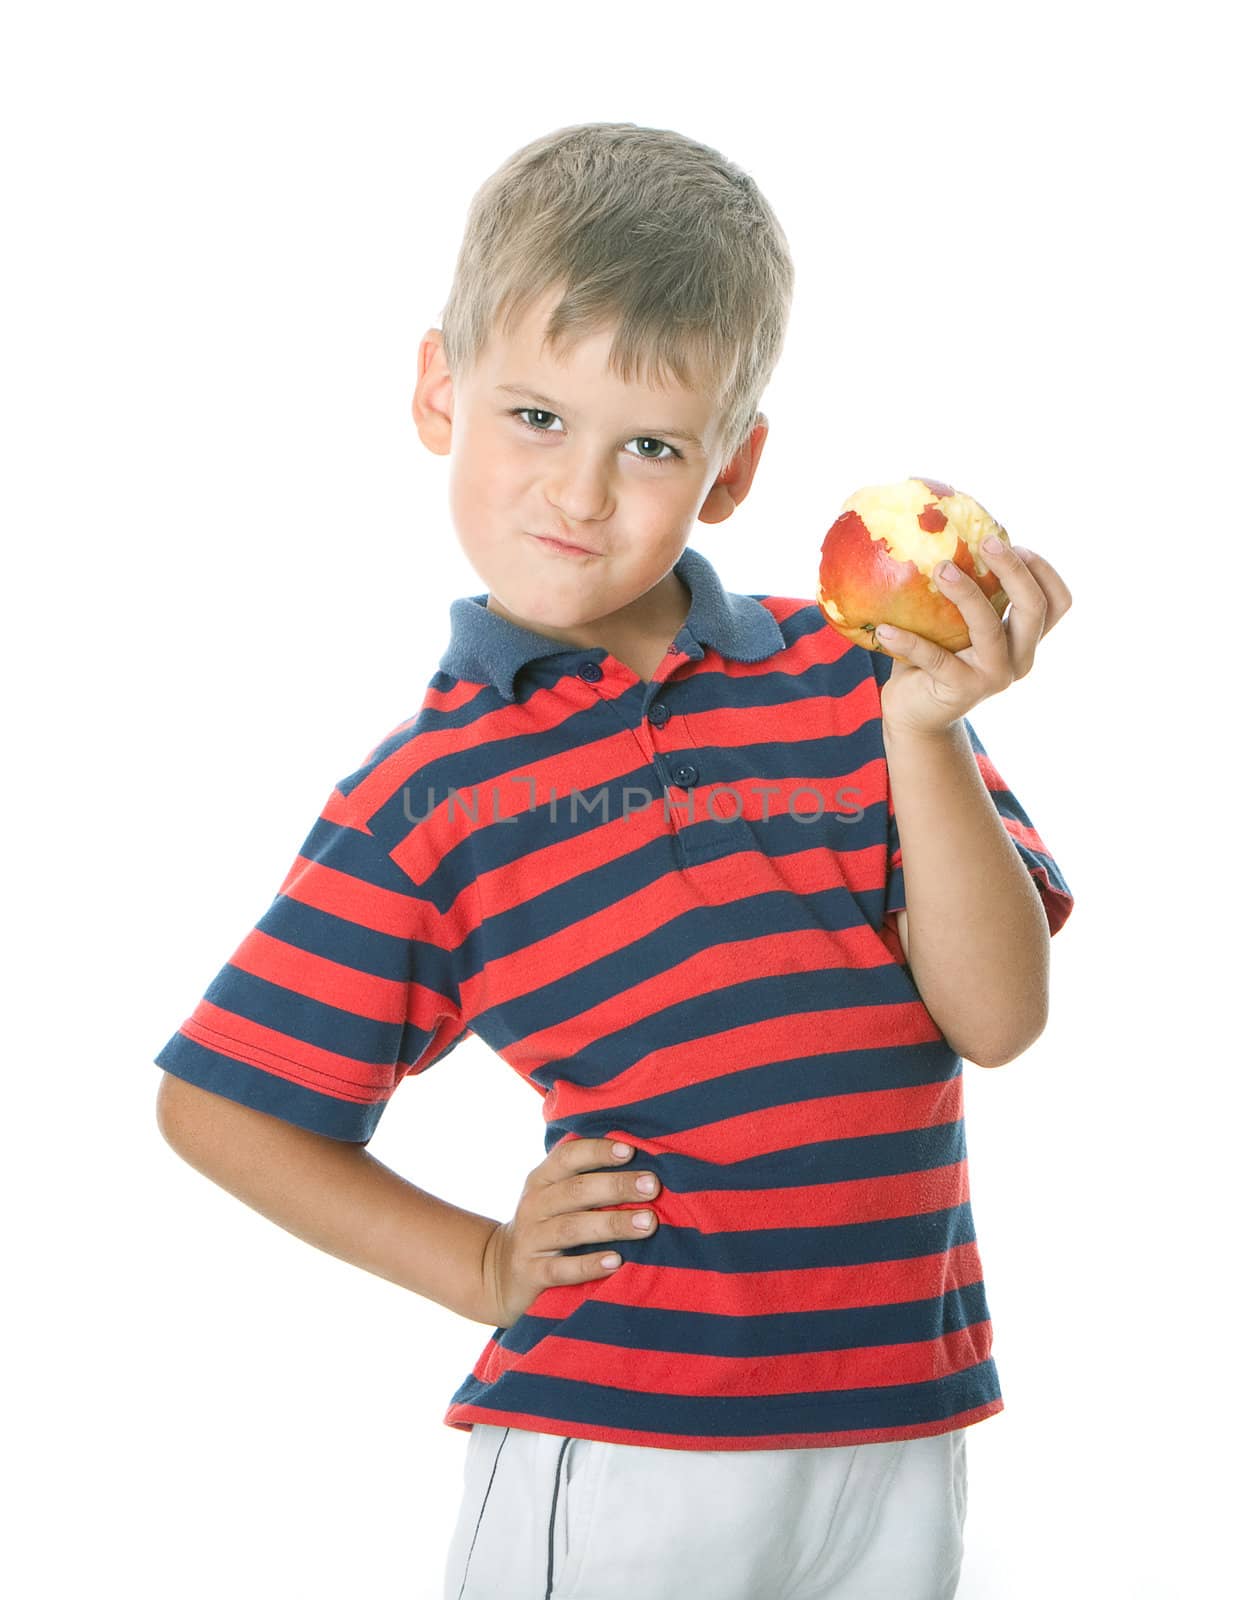 Boy holding an apple isolated on white background